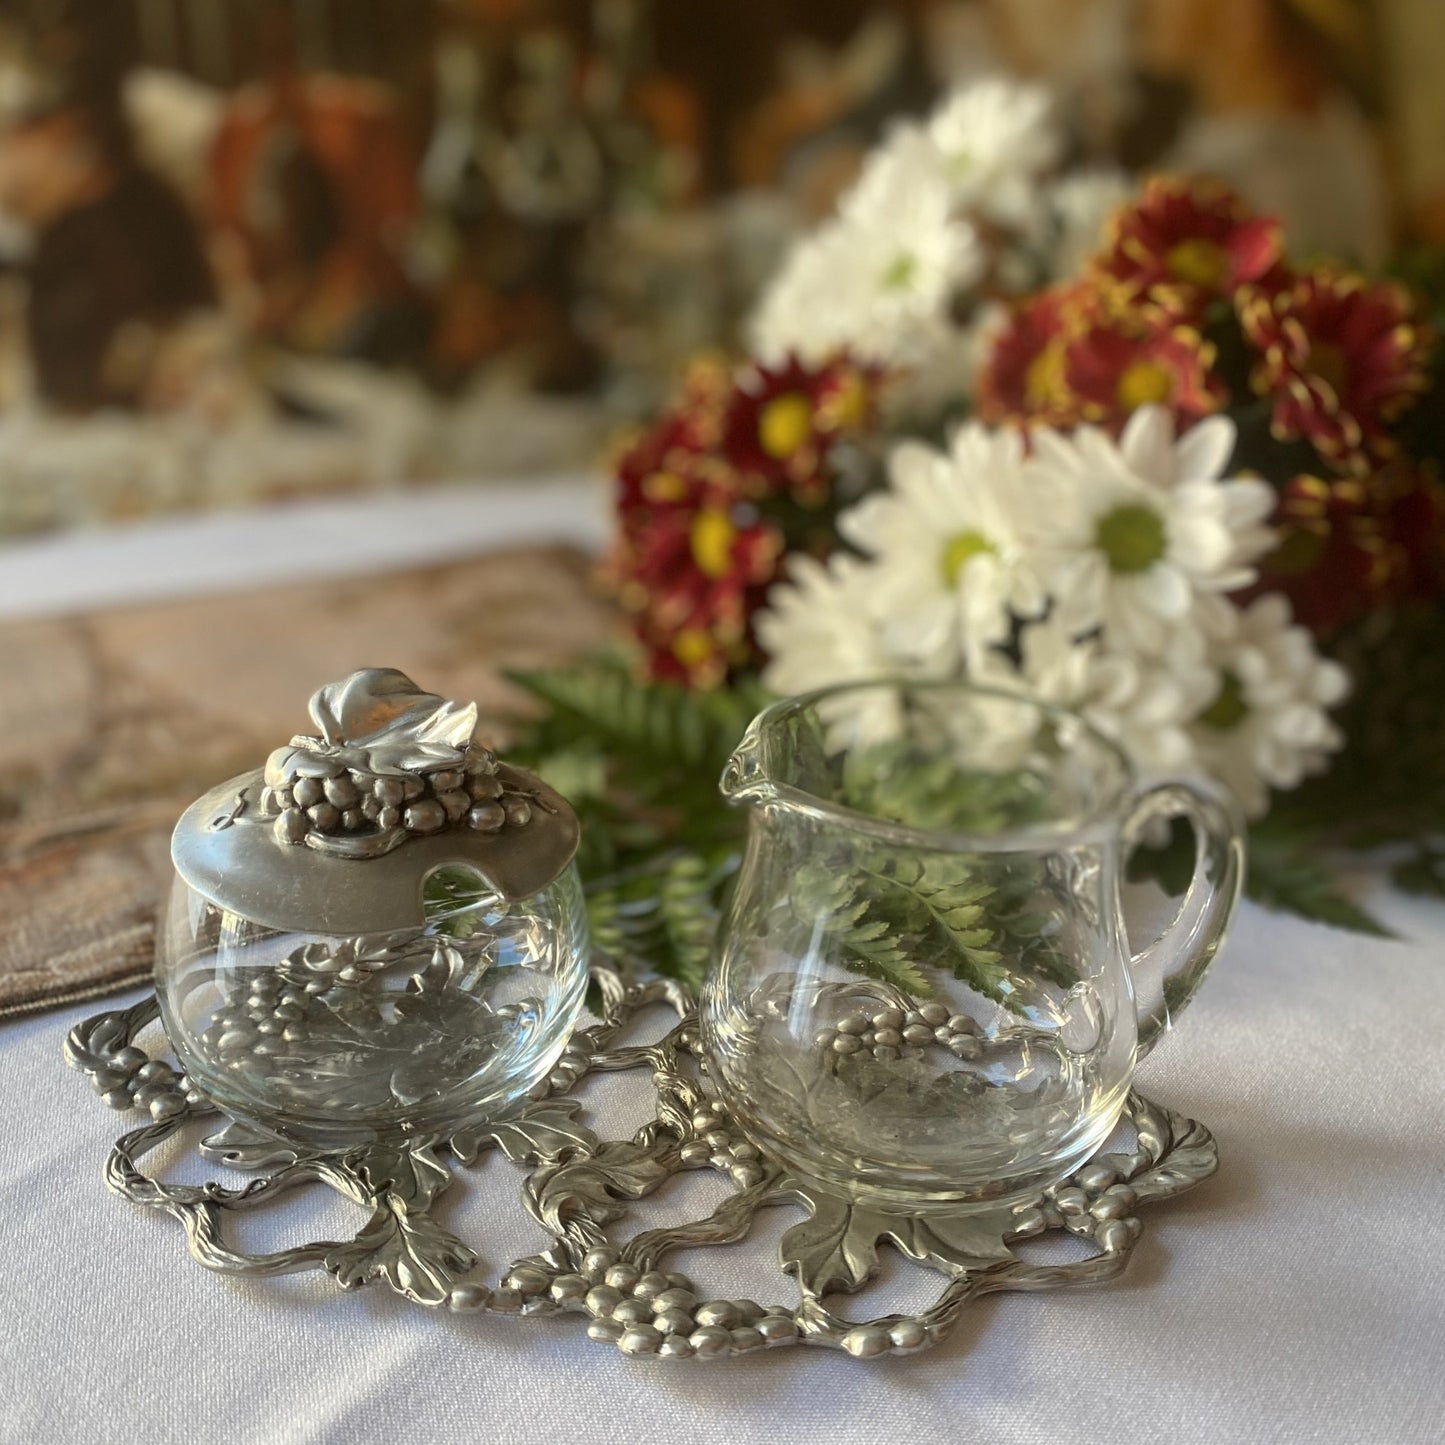 Seagull Pewter and Glass Sugar Bowl & creamer with support